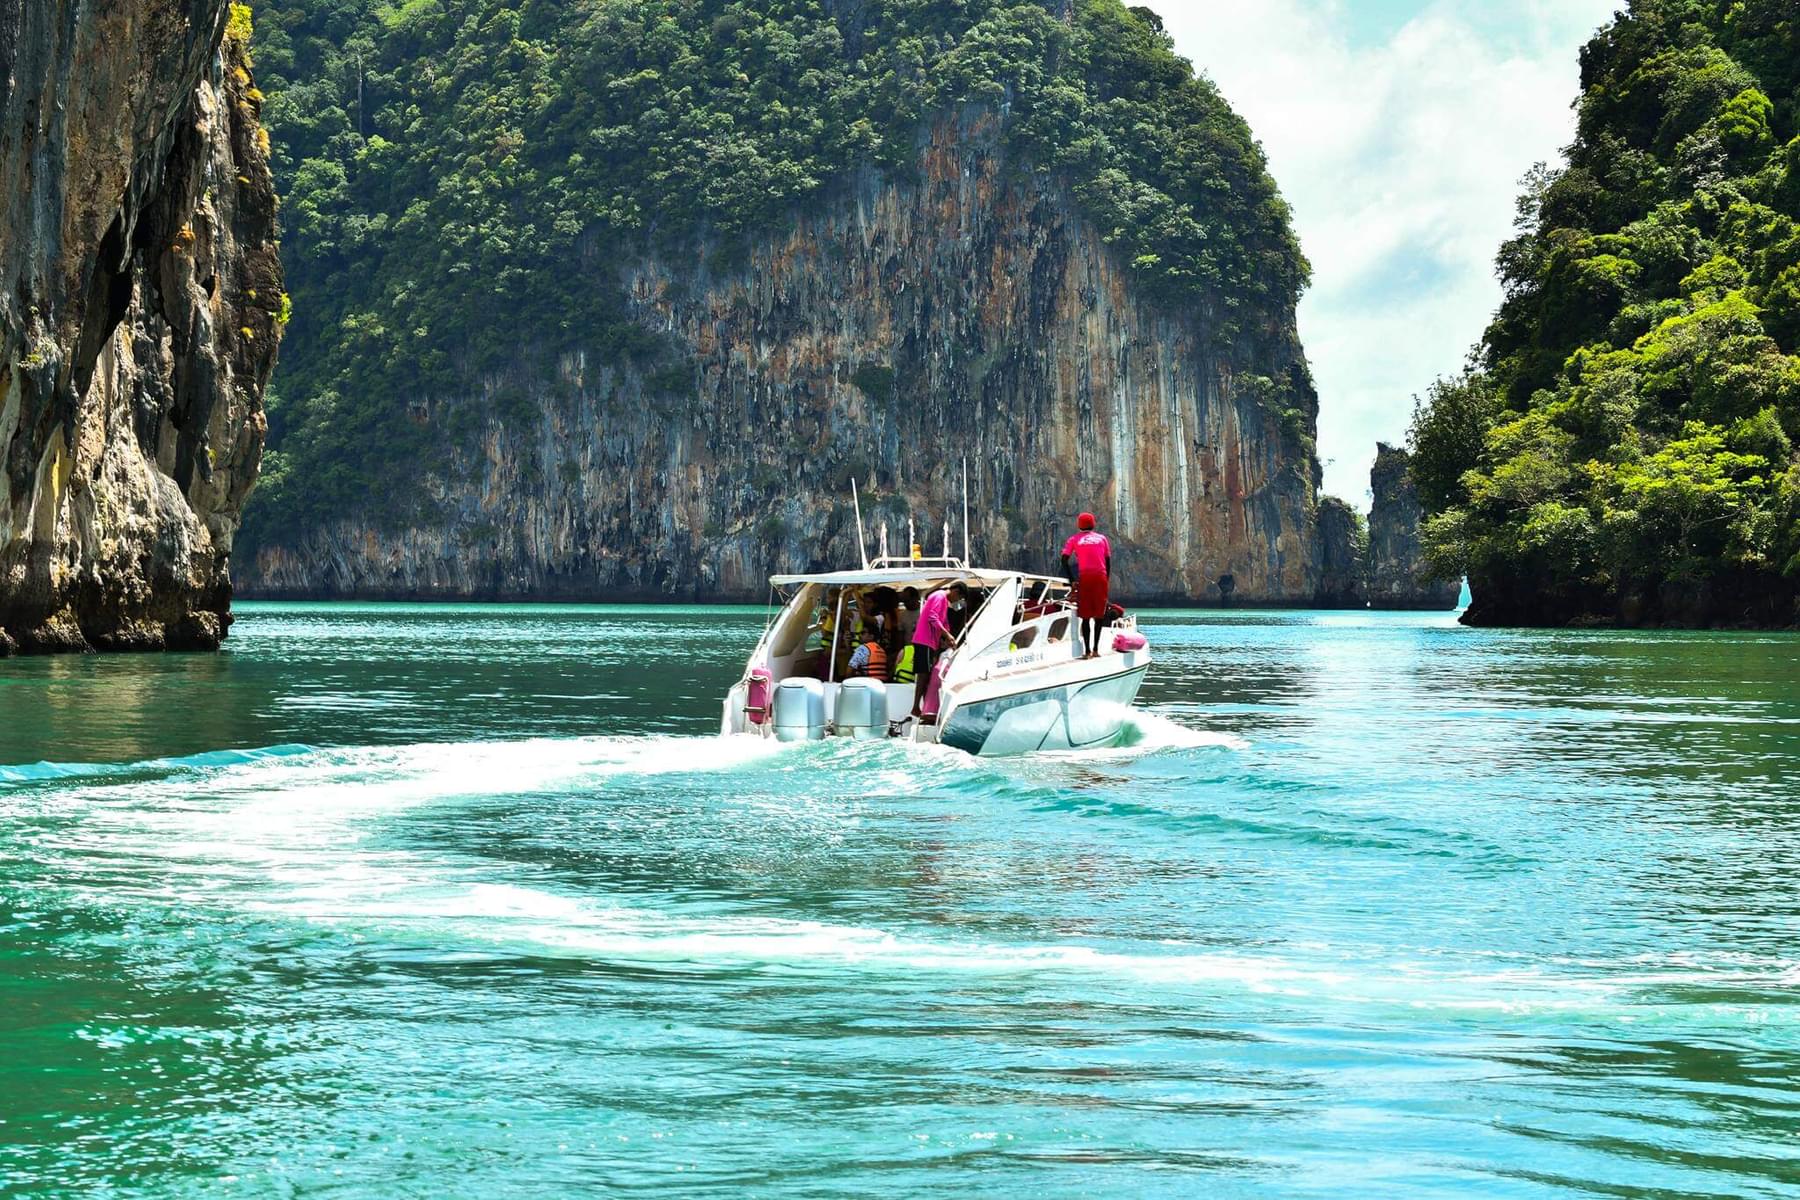 Feel the exhilaration with a speedy adventure on a thrilling speedboat.